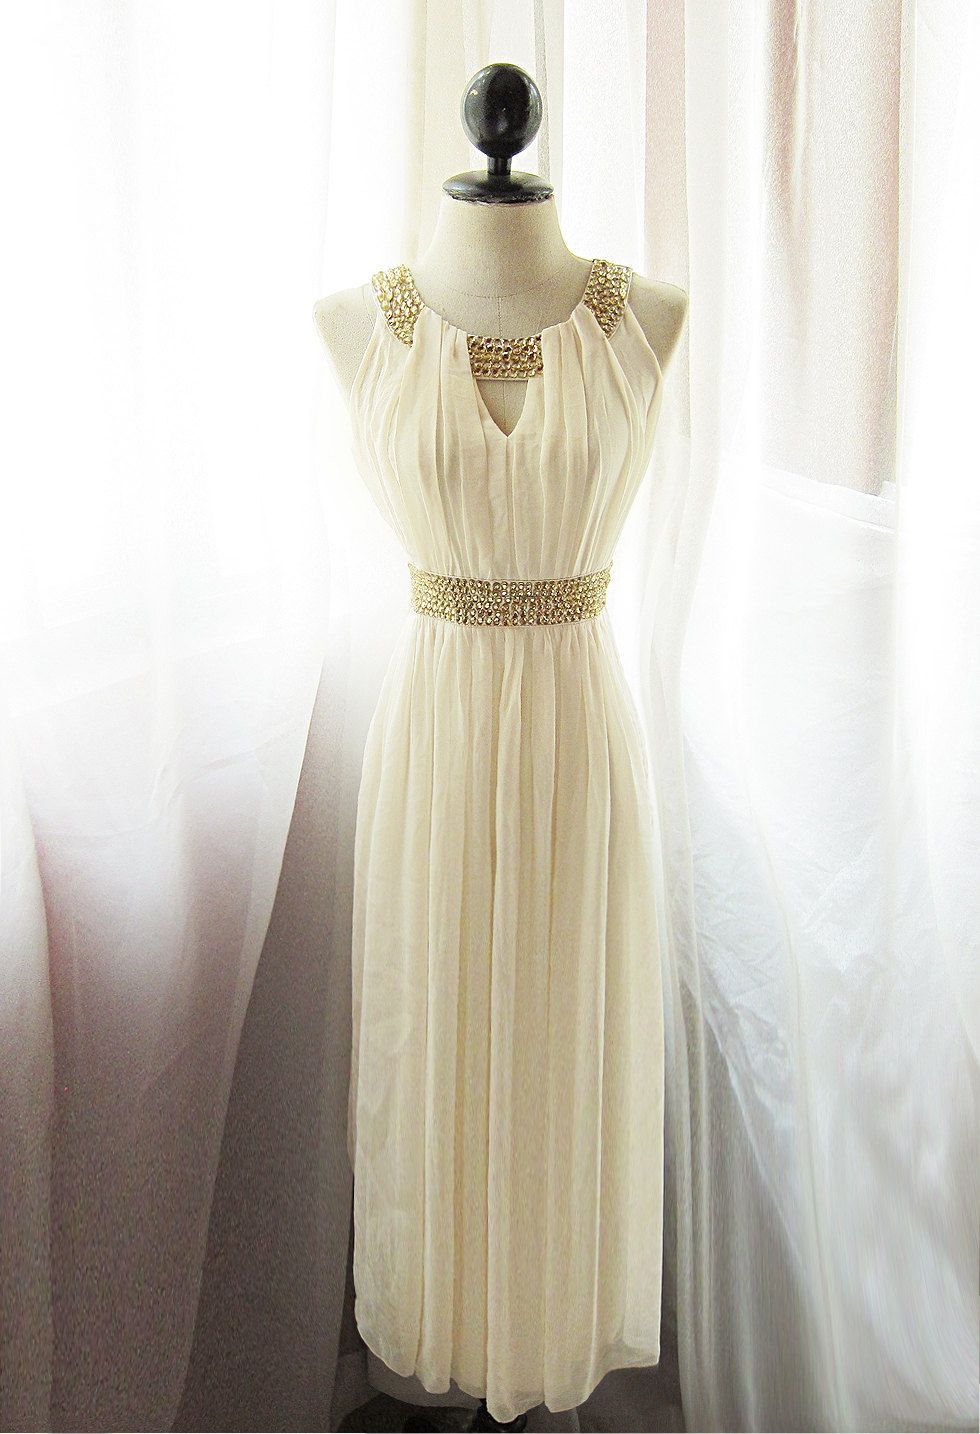 Items similar to Egyptian Goddess Soft French Cream Chiffon Long Dress Romance Dreamy Old World Charm Flowy Angel Marie Antoinette Gown on Etsy - Items similar to Egyptian Goddess Soft French Cream Chiffon Long Dress Romance Dreamy Old World Charm Flowy Angel Marie Antoinette Gown on Etsy -   13 egyptian style Dress ideas